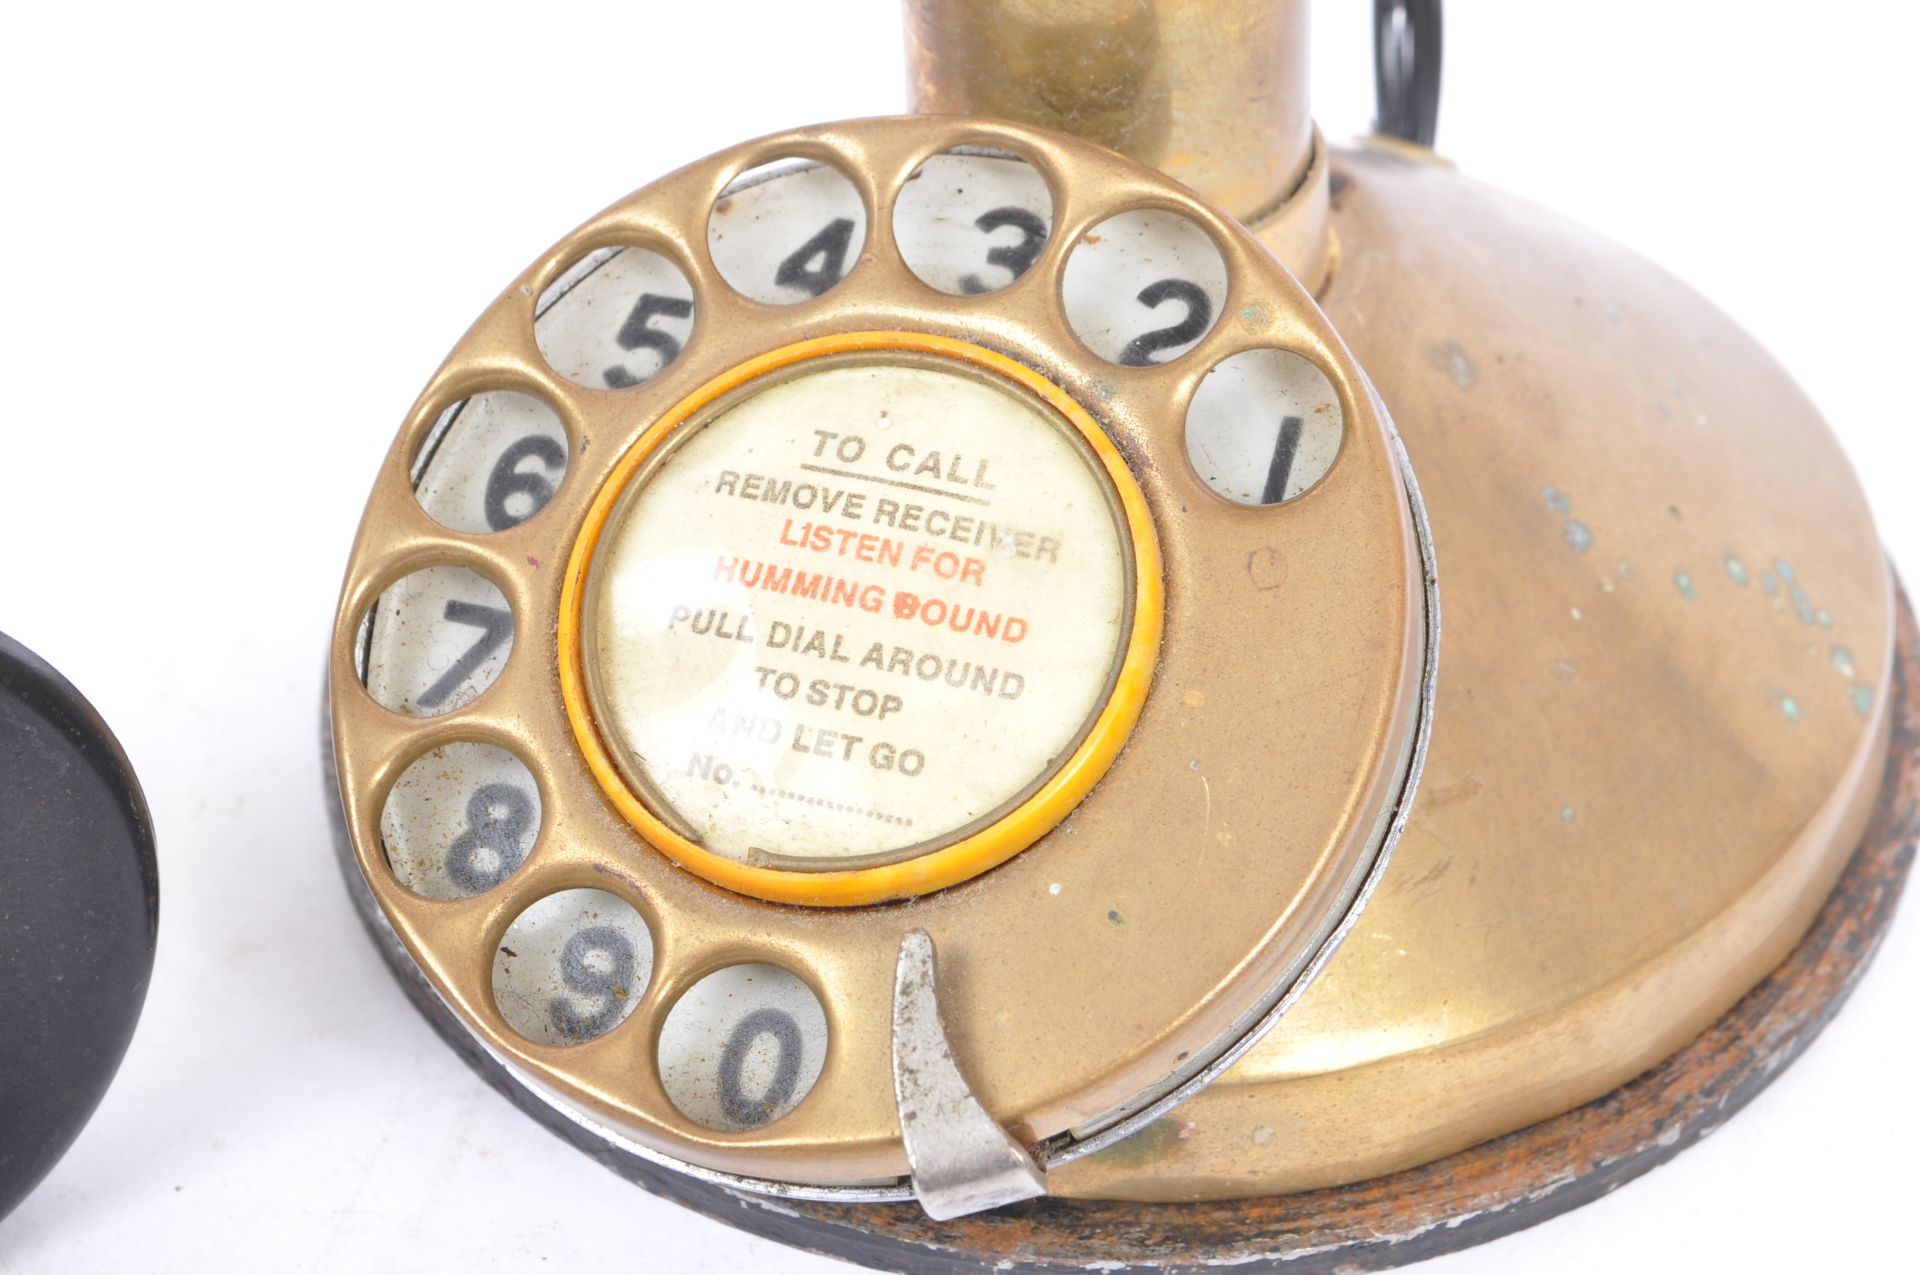 EARLY 20TH CENTURY BRASS CANDLESTICK TELEPHONE - Image 6 of 7